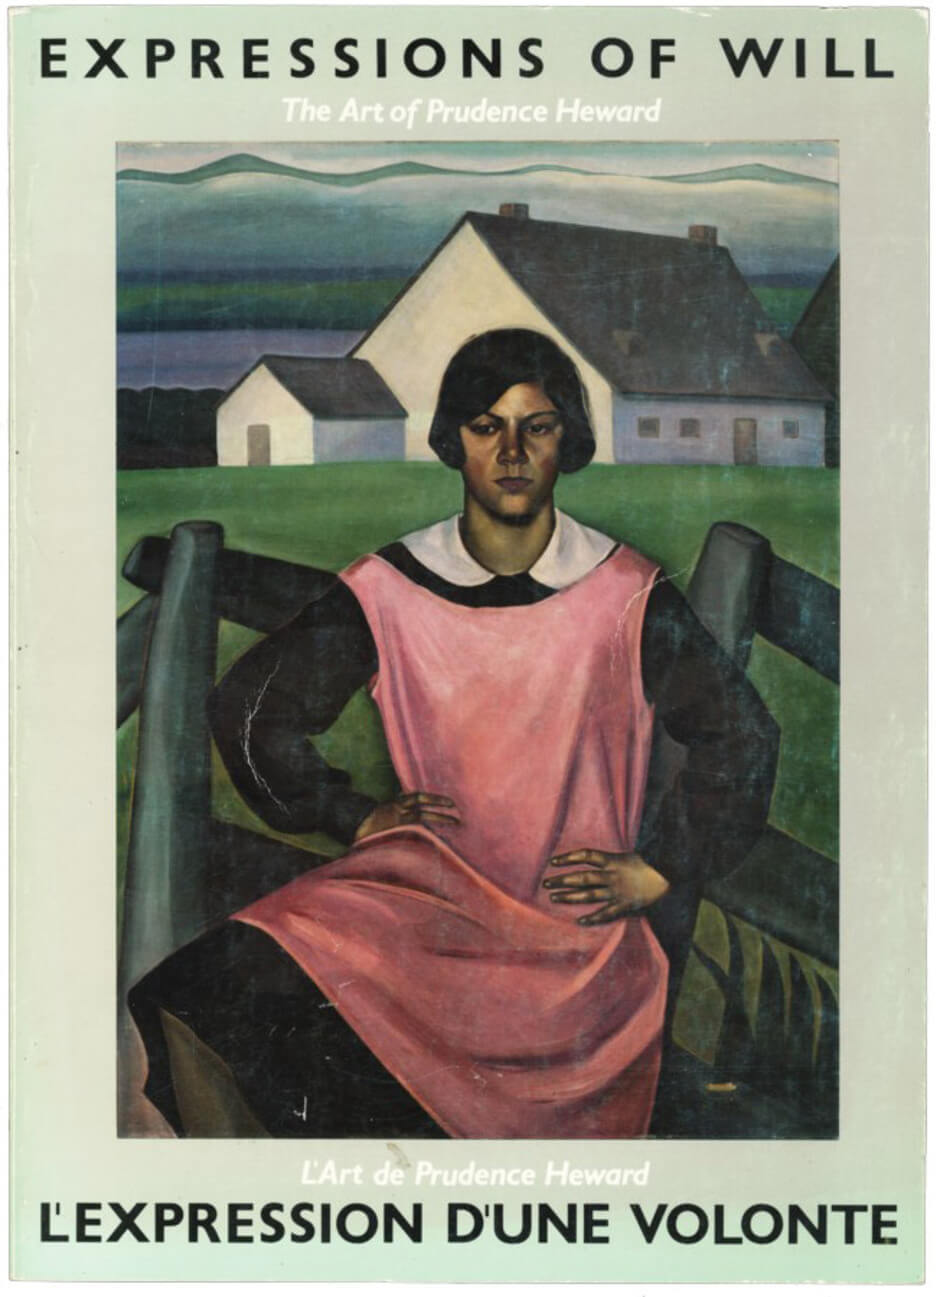 Art Canada Institute, Cover of exhibition catalogue Expressions of Will: The Art of Prudence Heward curated by Natalie Luckyj.